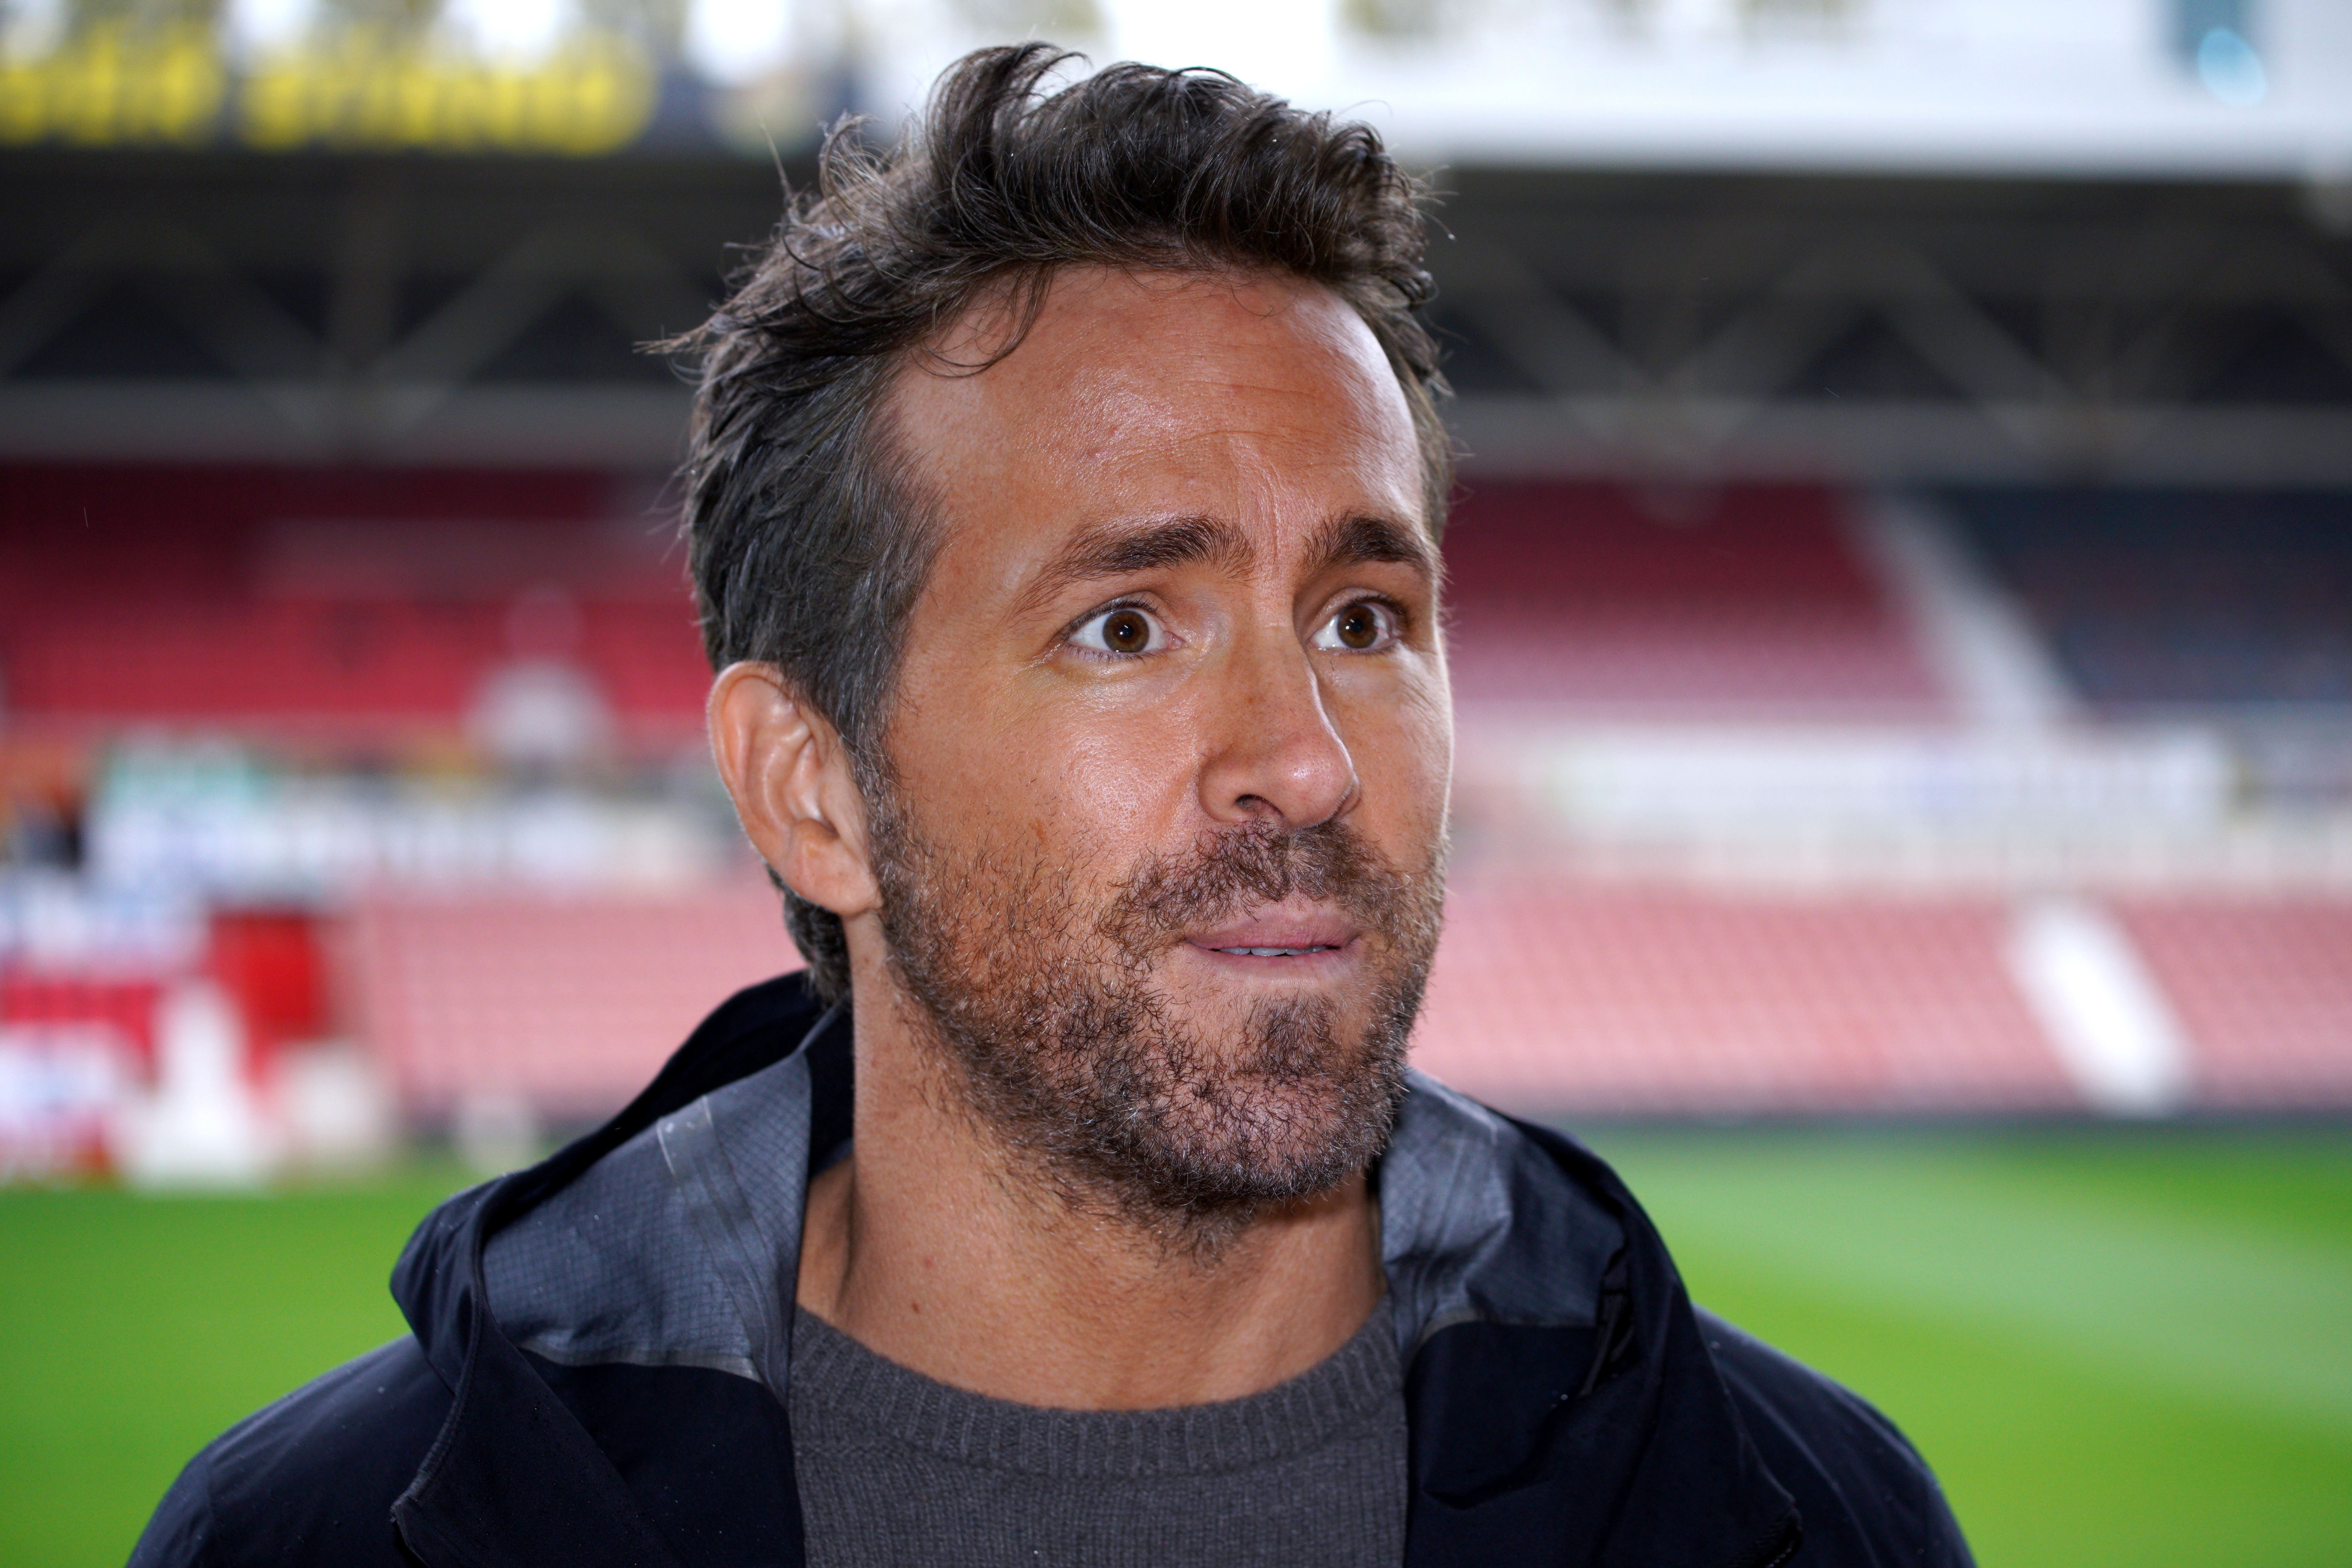 Wrexham co-owner Ryan Reynolds has sent Wales a good luck message ahead of their World Cup opener (Peter Byrne/PA)